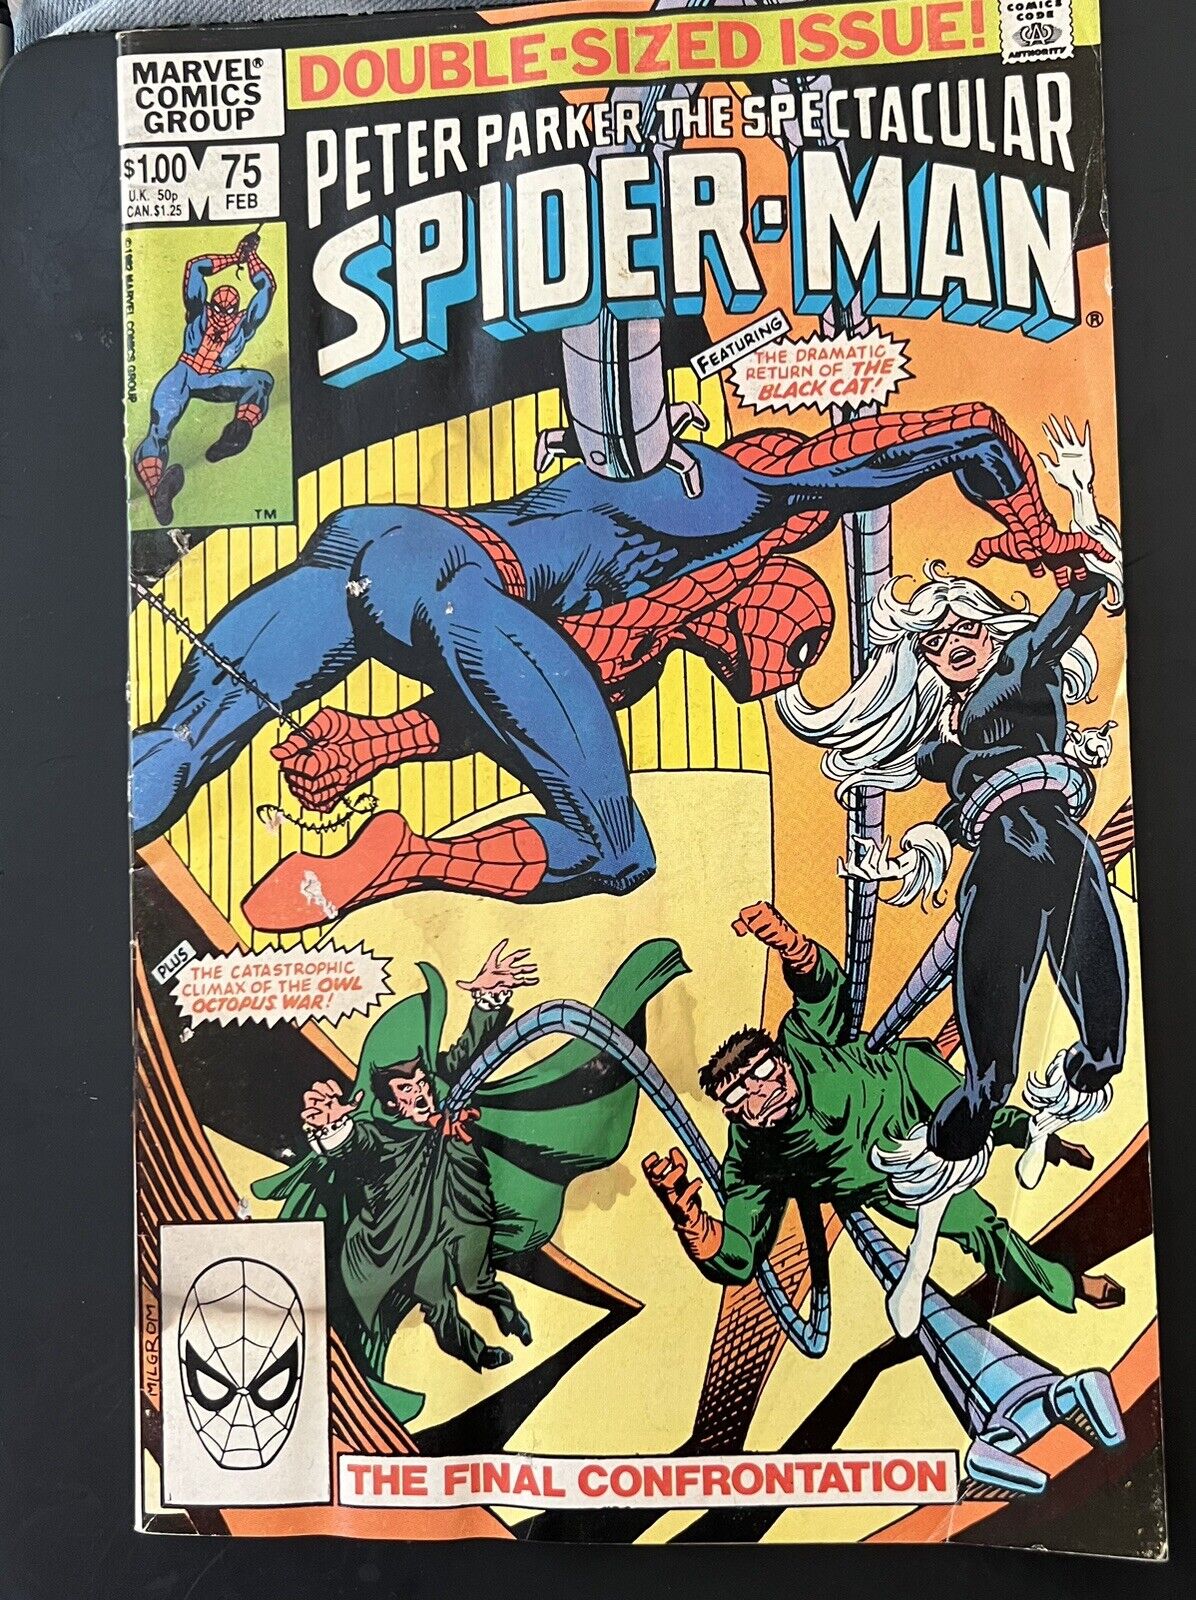 The Spectacular Spider-Man #75 (1993) The Final Confrontation